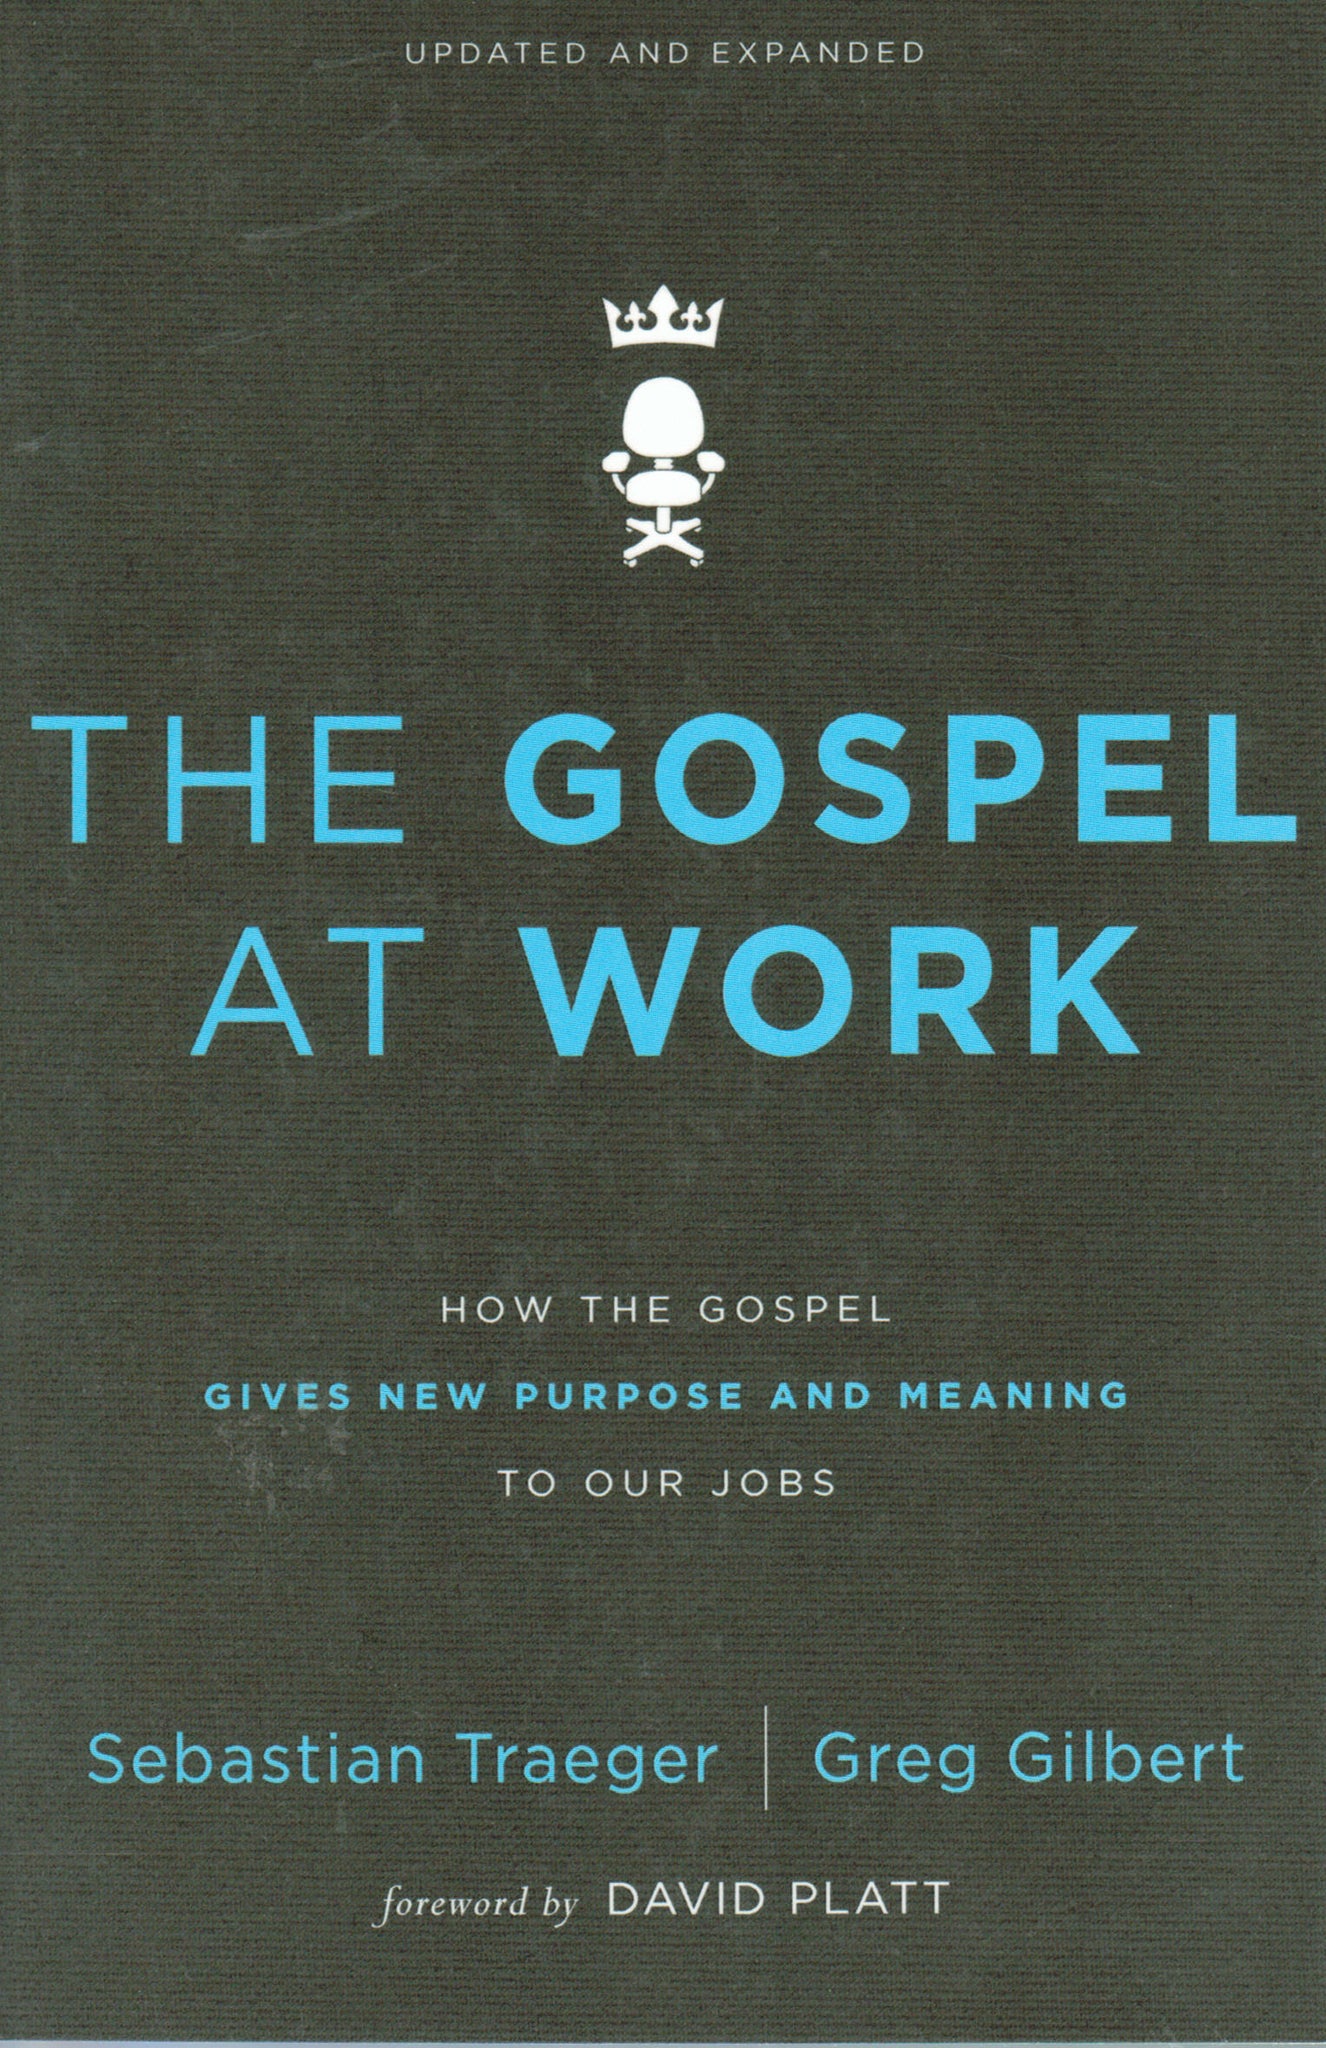 The Gospel at Work: How the Gospel Gives New Purpose and Meaning to our Jobs